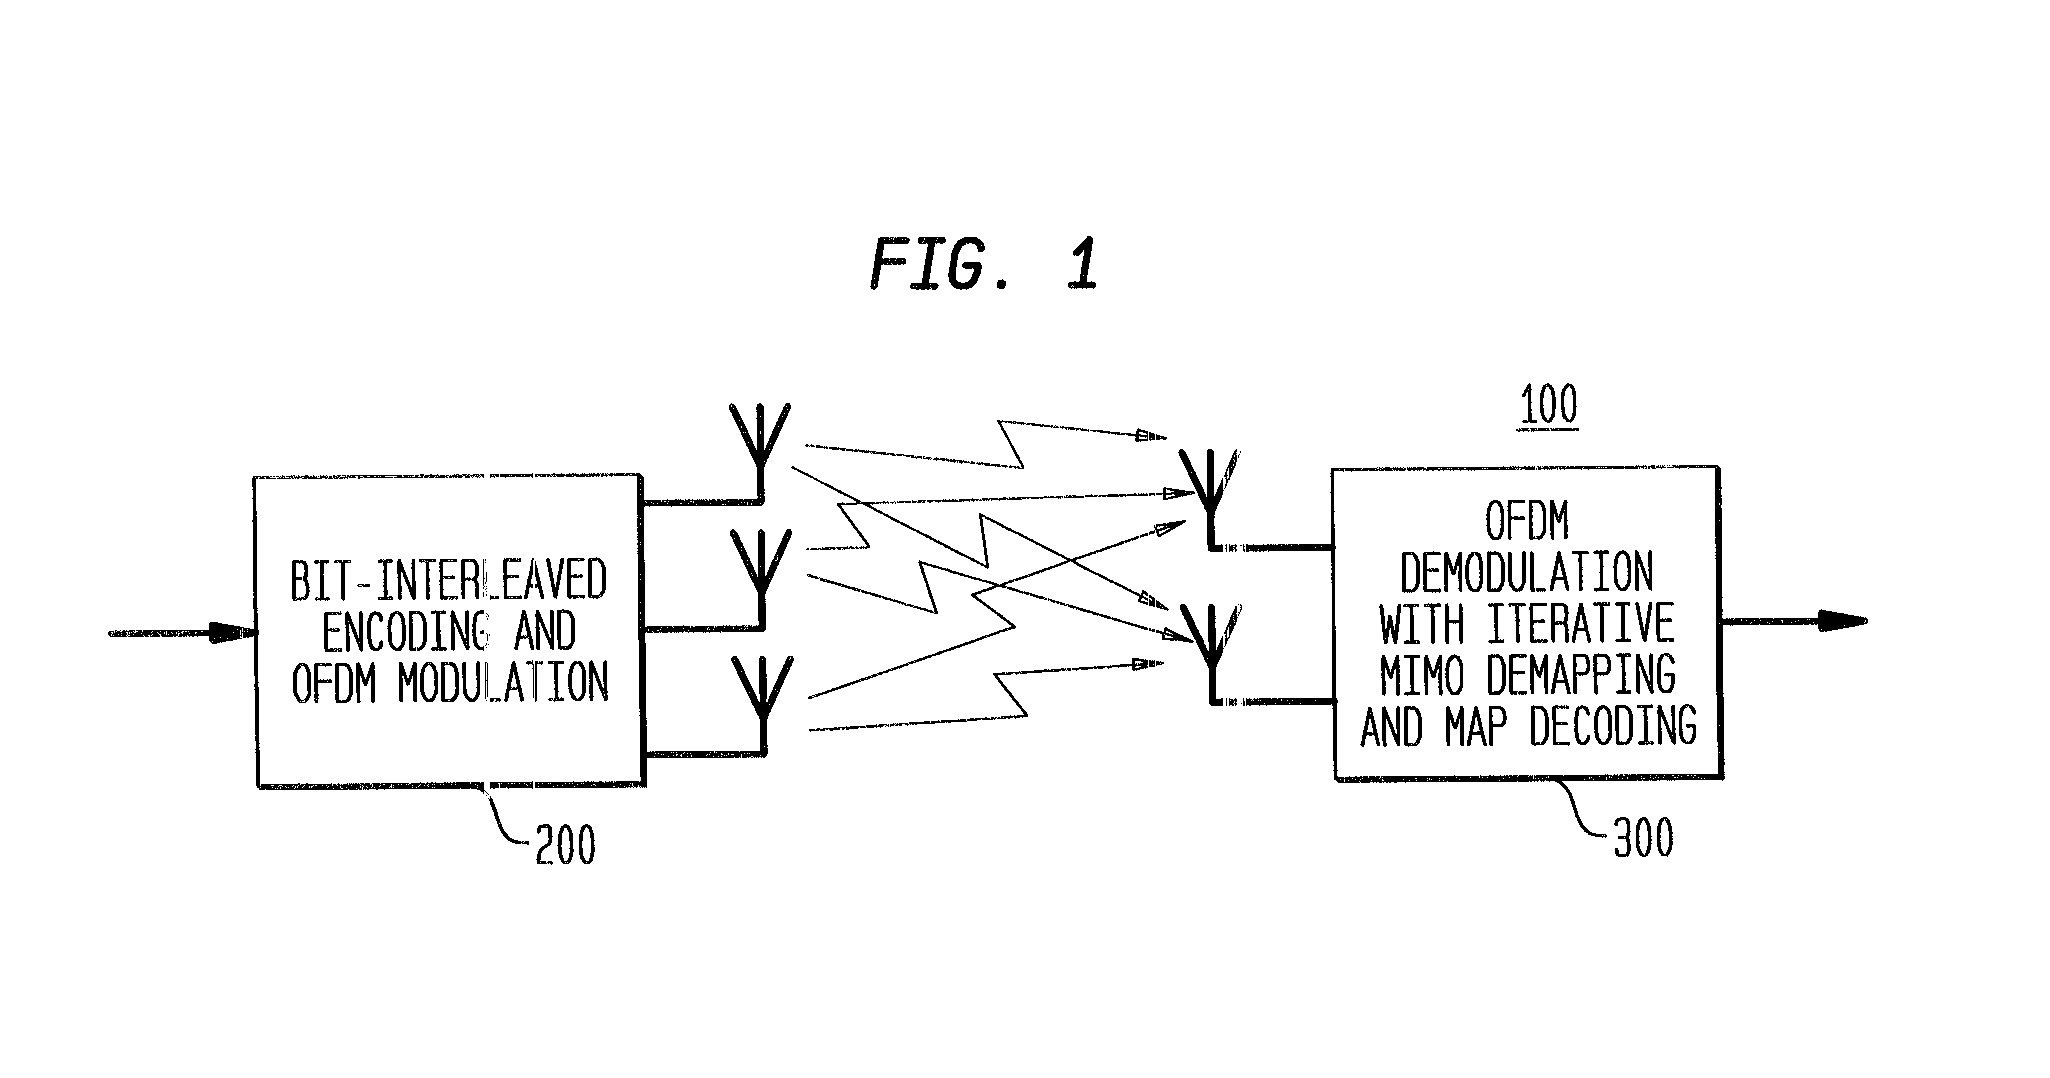 Space-time bit-interleaved coded modulation for wideband transmission